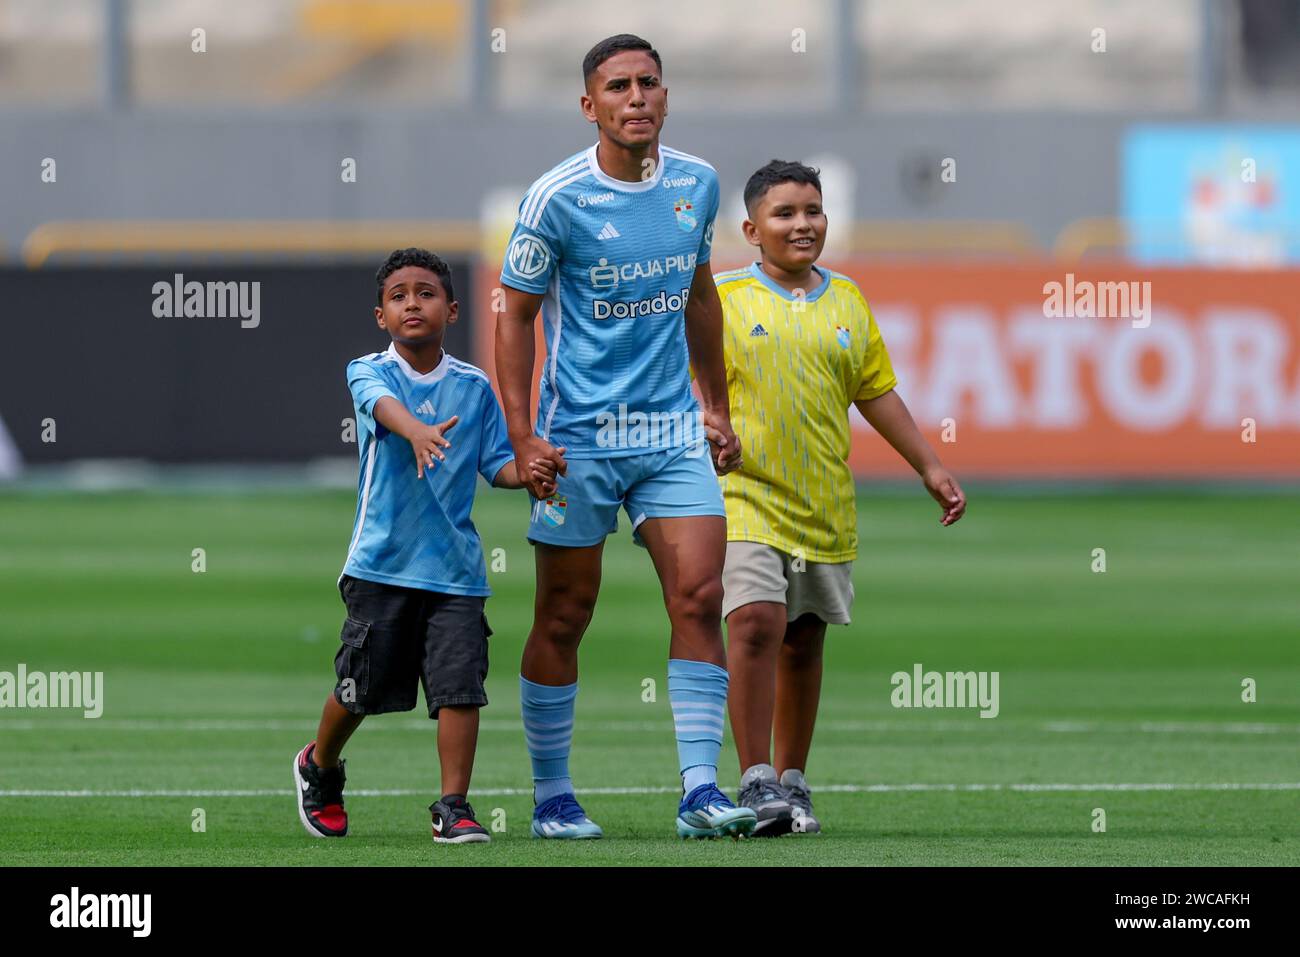 Lima, Peru. 14th Jan, 2024. Gianfranco Chavez of Sporting Cristal during the friendly match between Sporting Cristal and Universidad Catolica de Chile played at Nacional Stadium on January 14, 2024 in Lima, Peru. (Photo by Miguel Marrufo/PRESSINPHOTO) Credit: PRESSINPHOTO SPORTS AGENCY/Alamy Live News Stock Photo